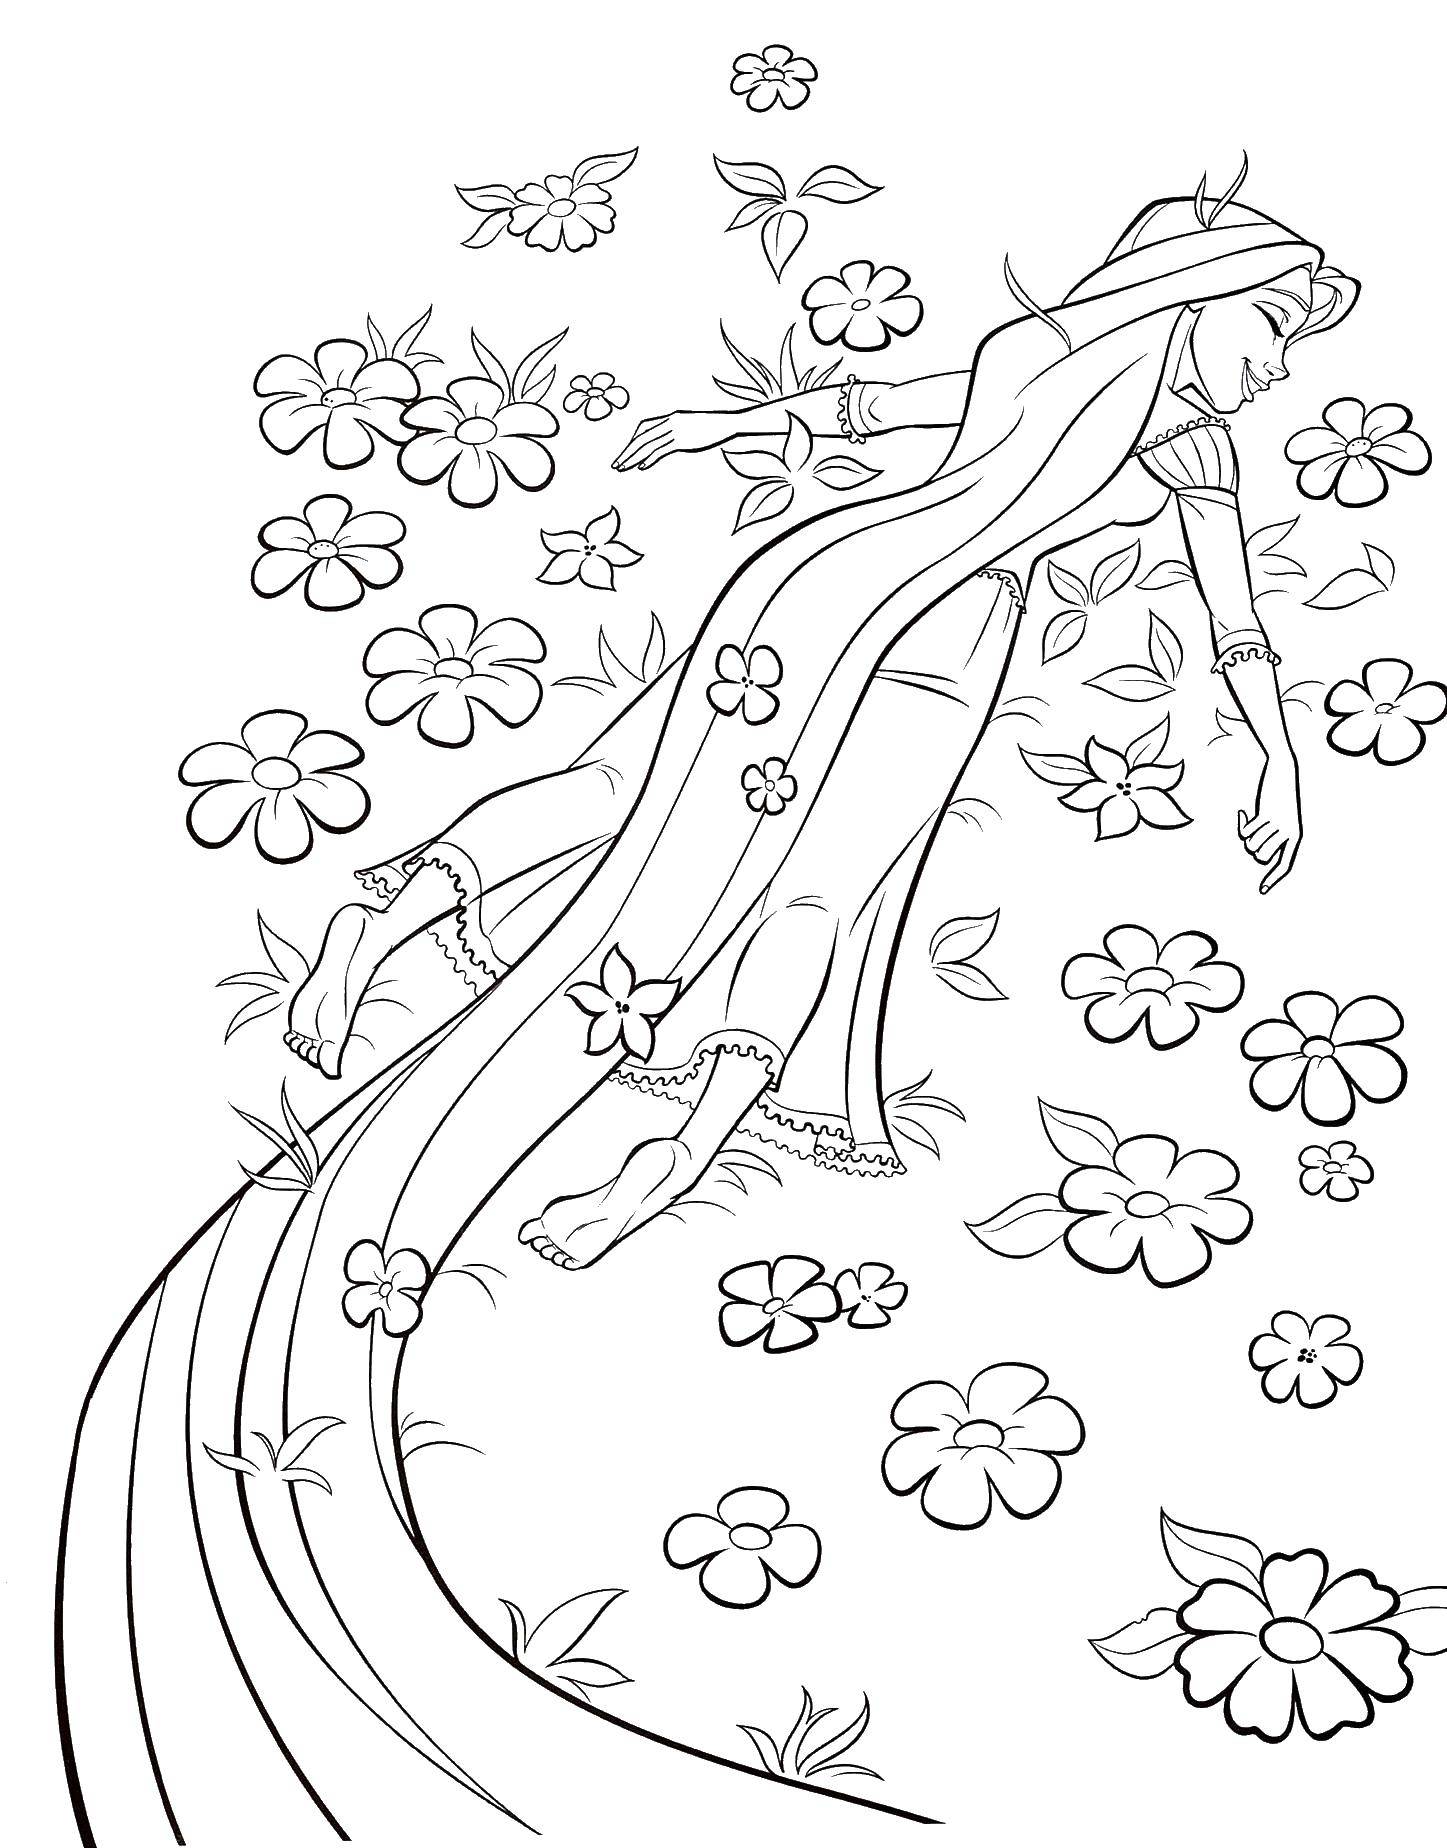 Coloring Rapunzel and flowers. Category Princess. Tags:  Princess, Rapunzel, hair, flowers.